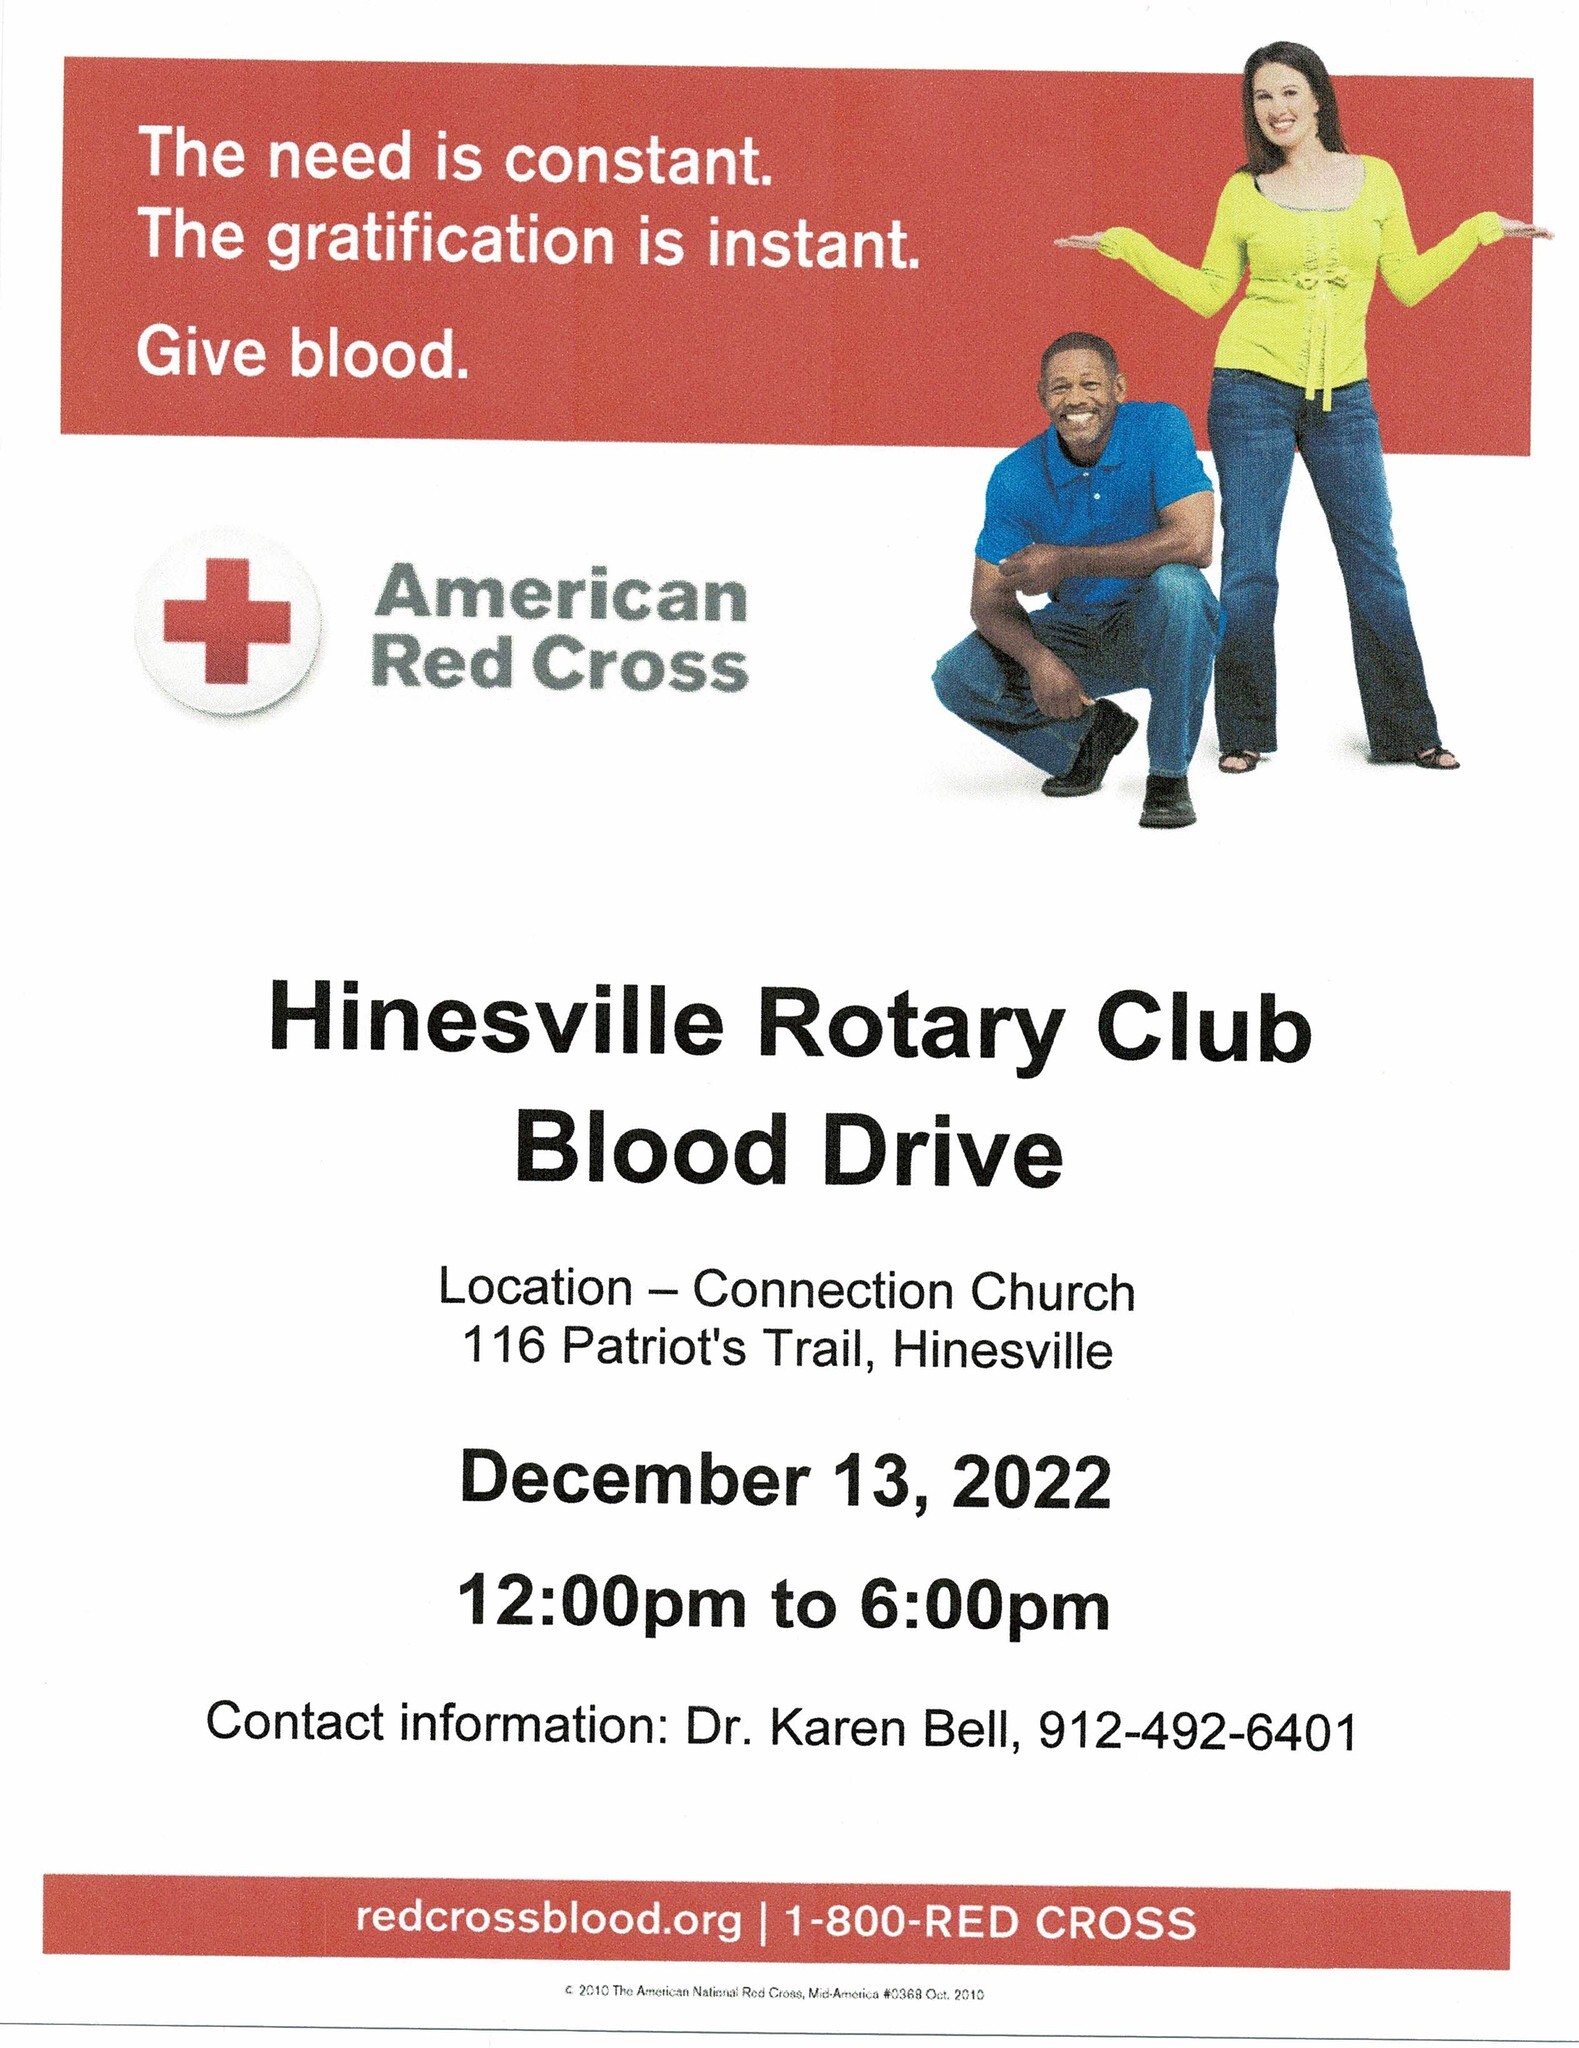 Hinesville Rotary Club Blood Drive